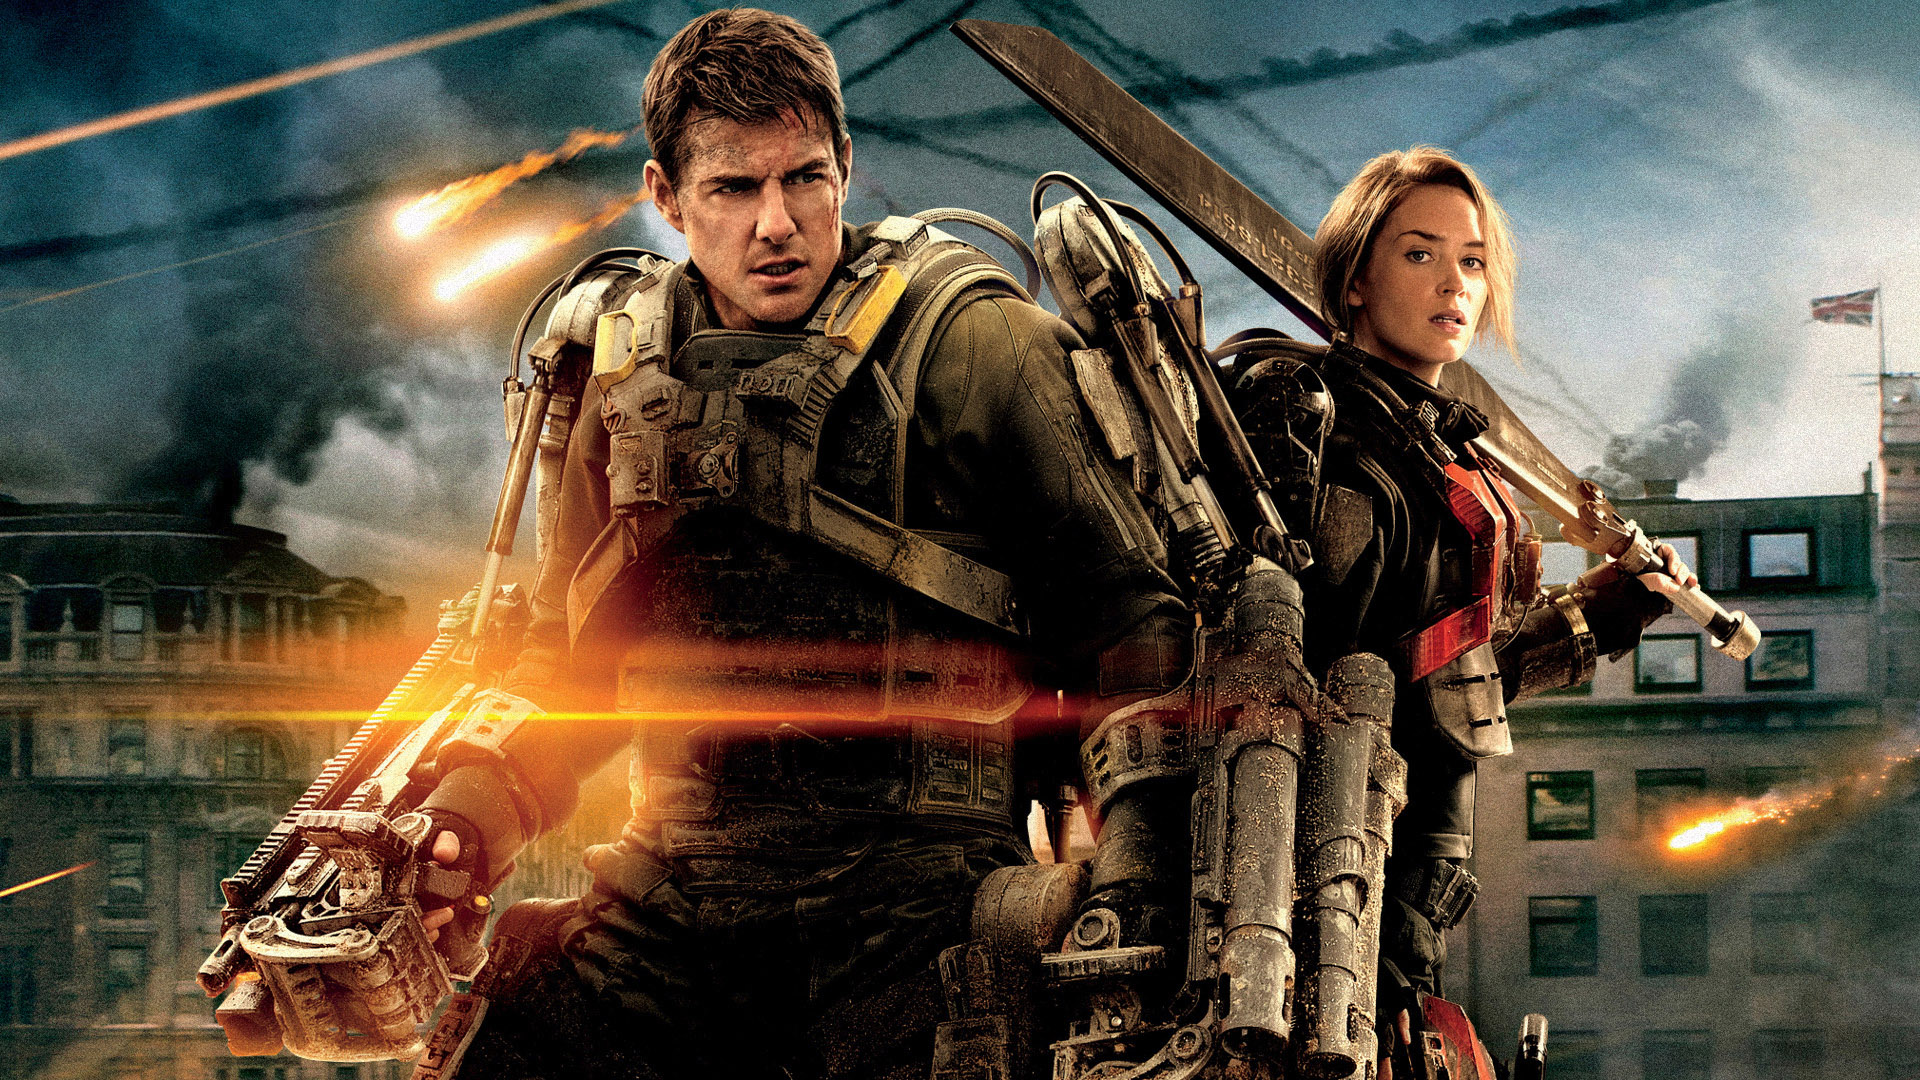 Edge of Tomorrow (2014) Review – On The Edge Of Perfection